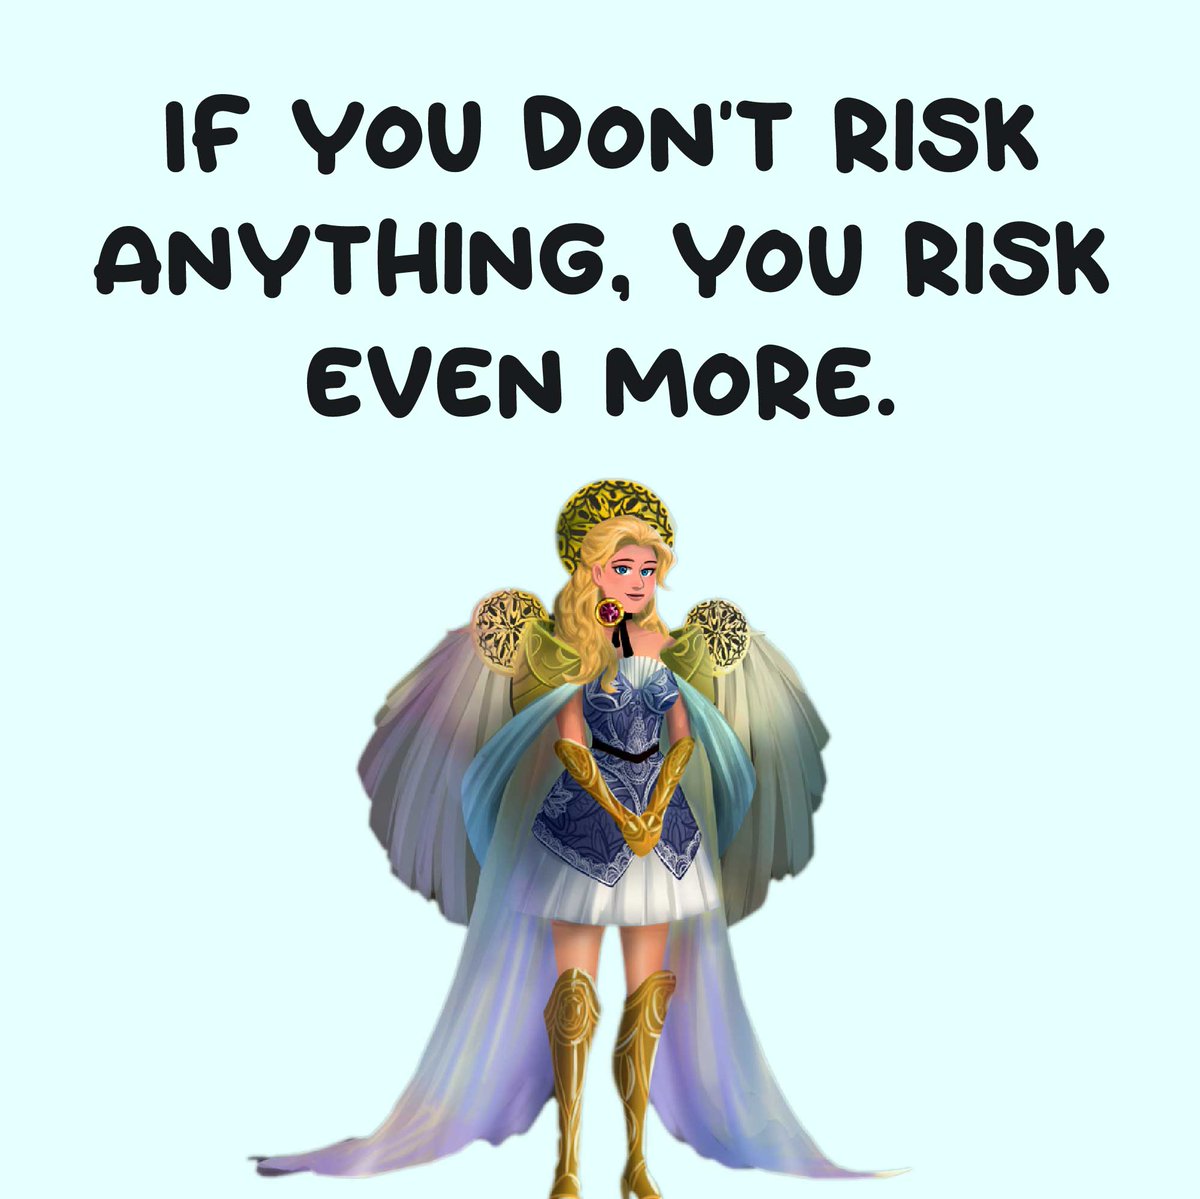 Learn to take a risk. #motivational #quote #takerisk #lifelesson